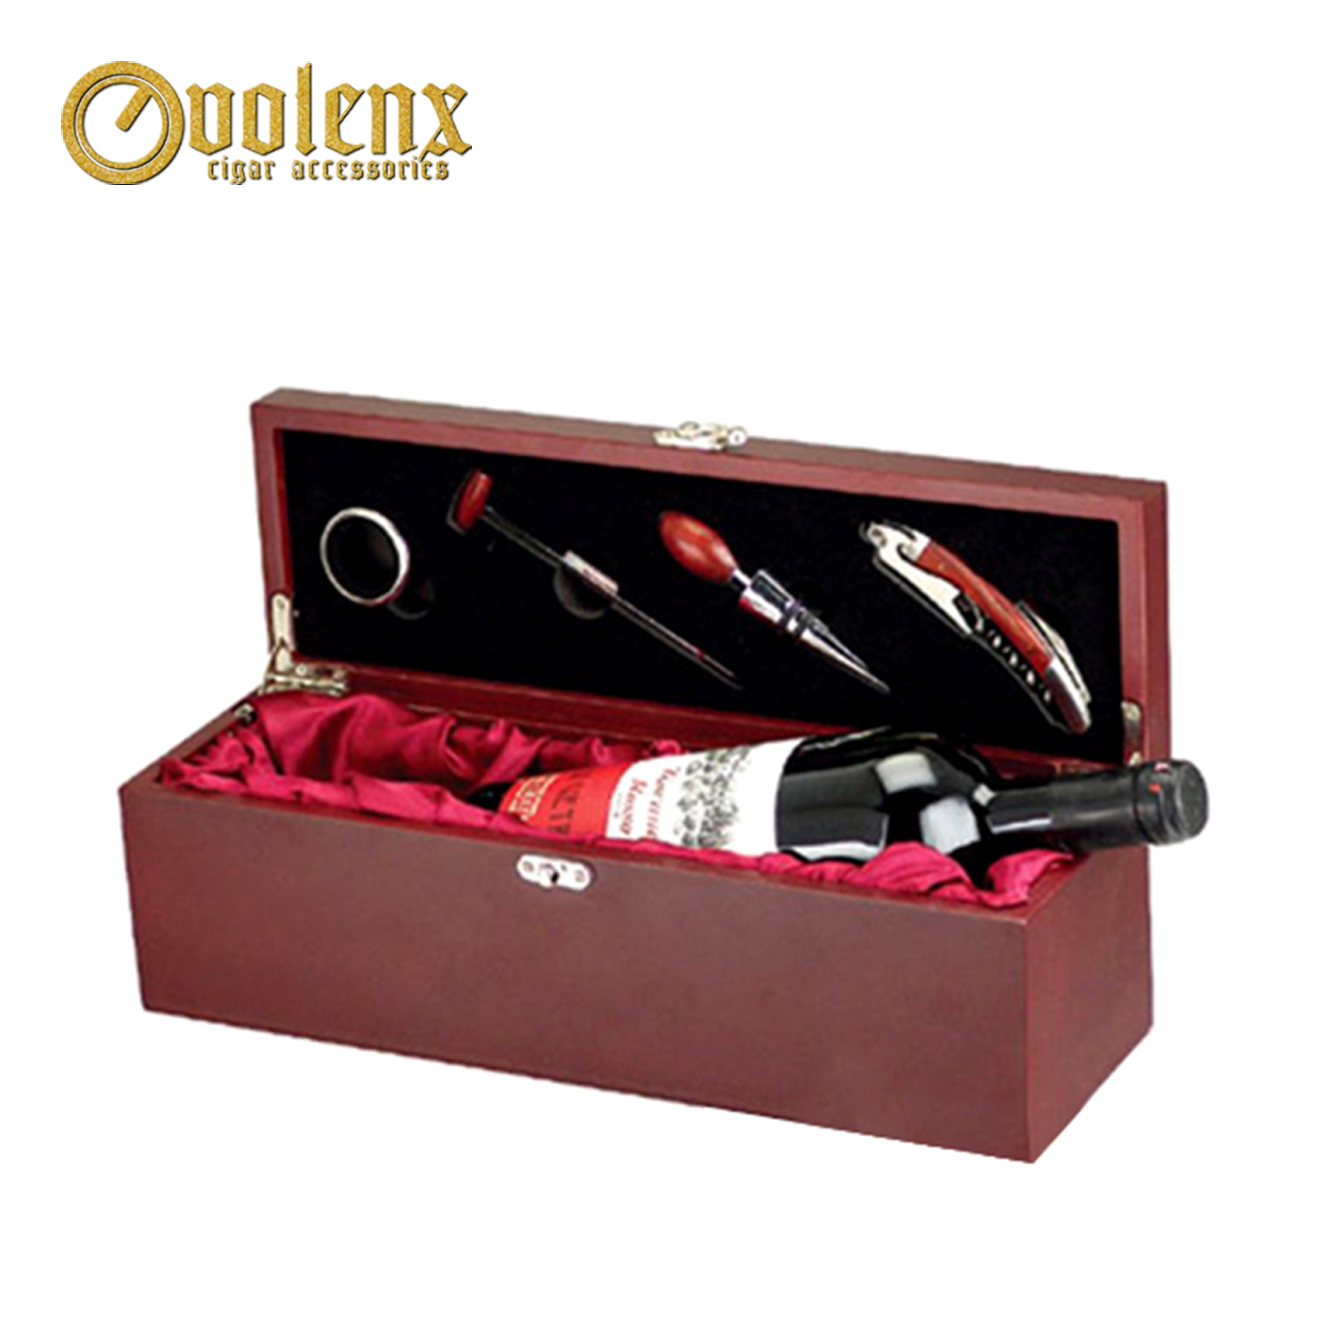 Excellent Quality with Factory Price Elite Hour Glass Wine Aerator Set WLWS-0085 Details 10